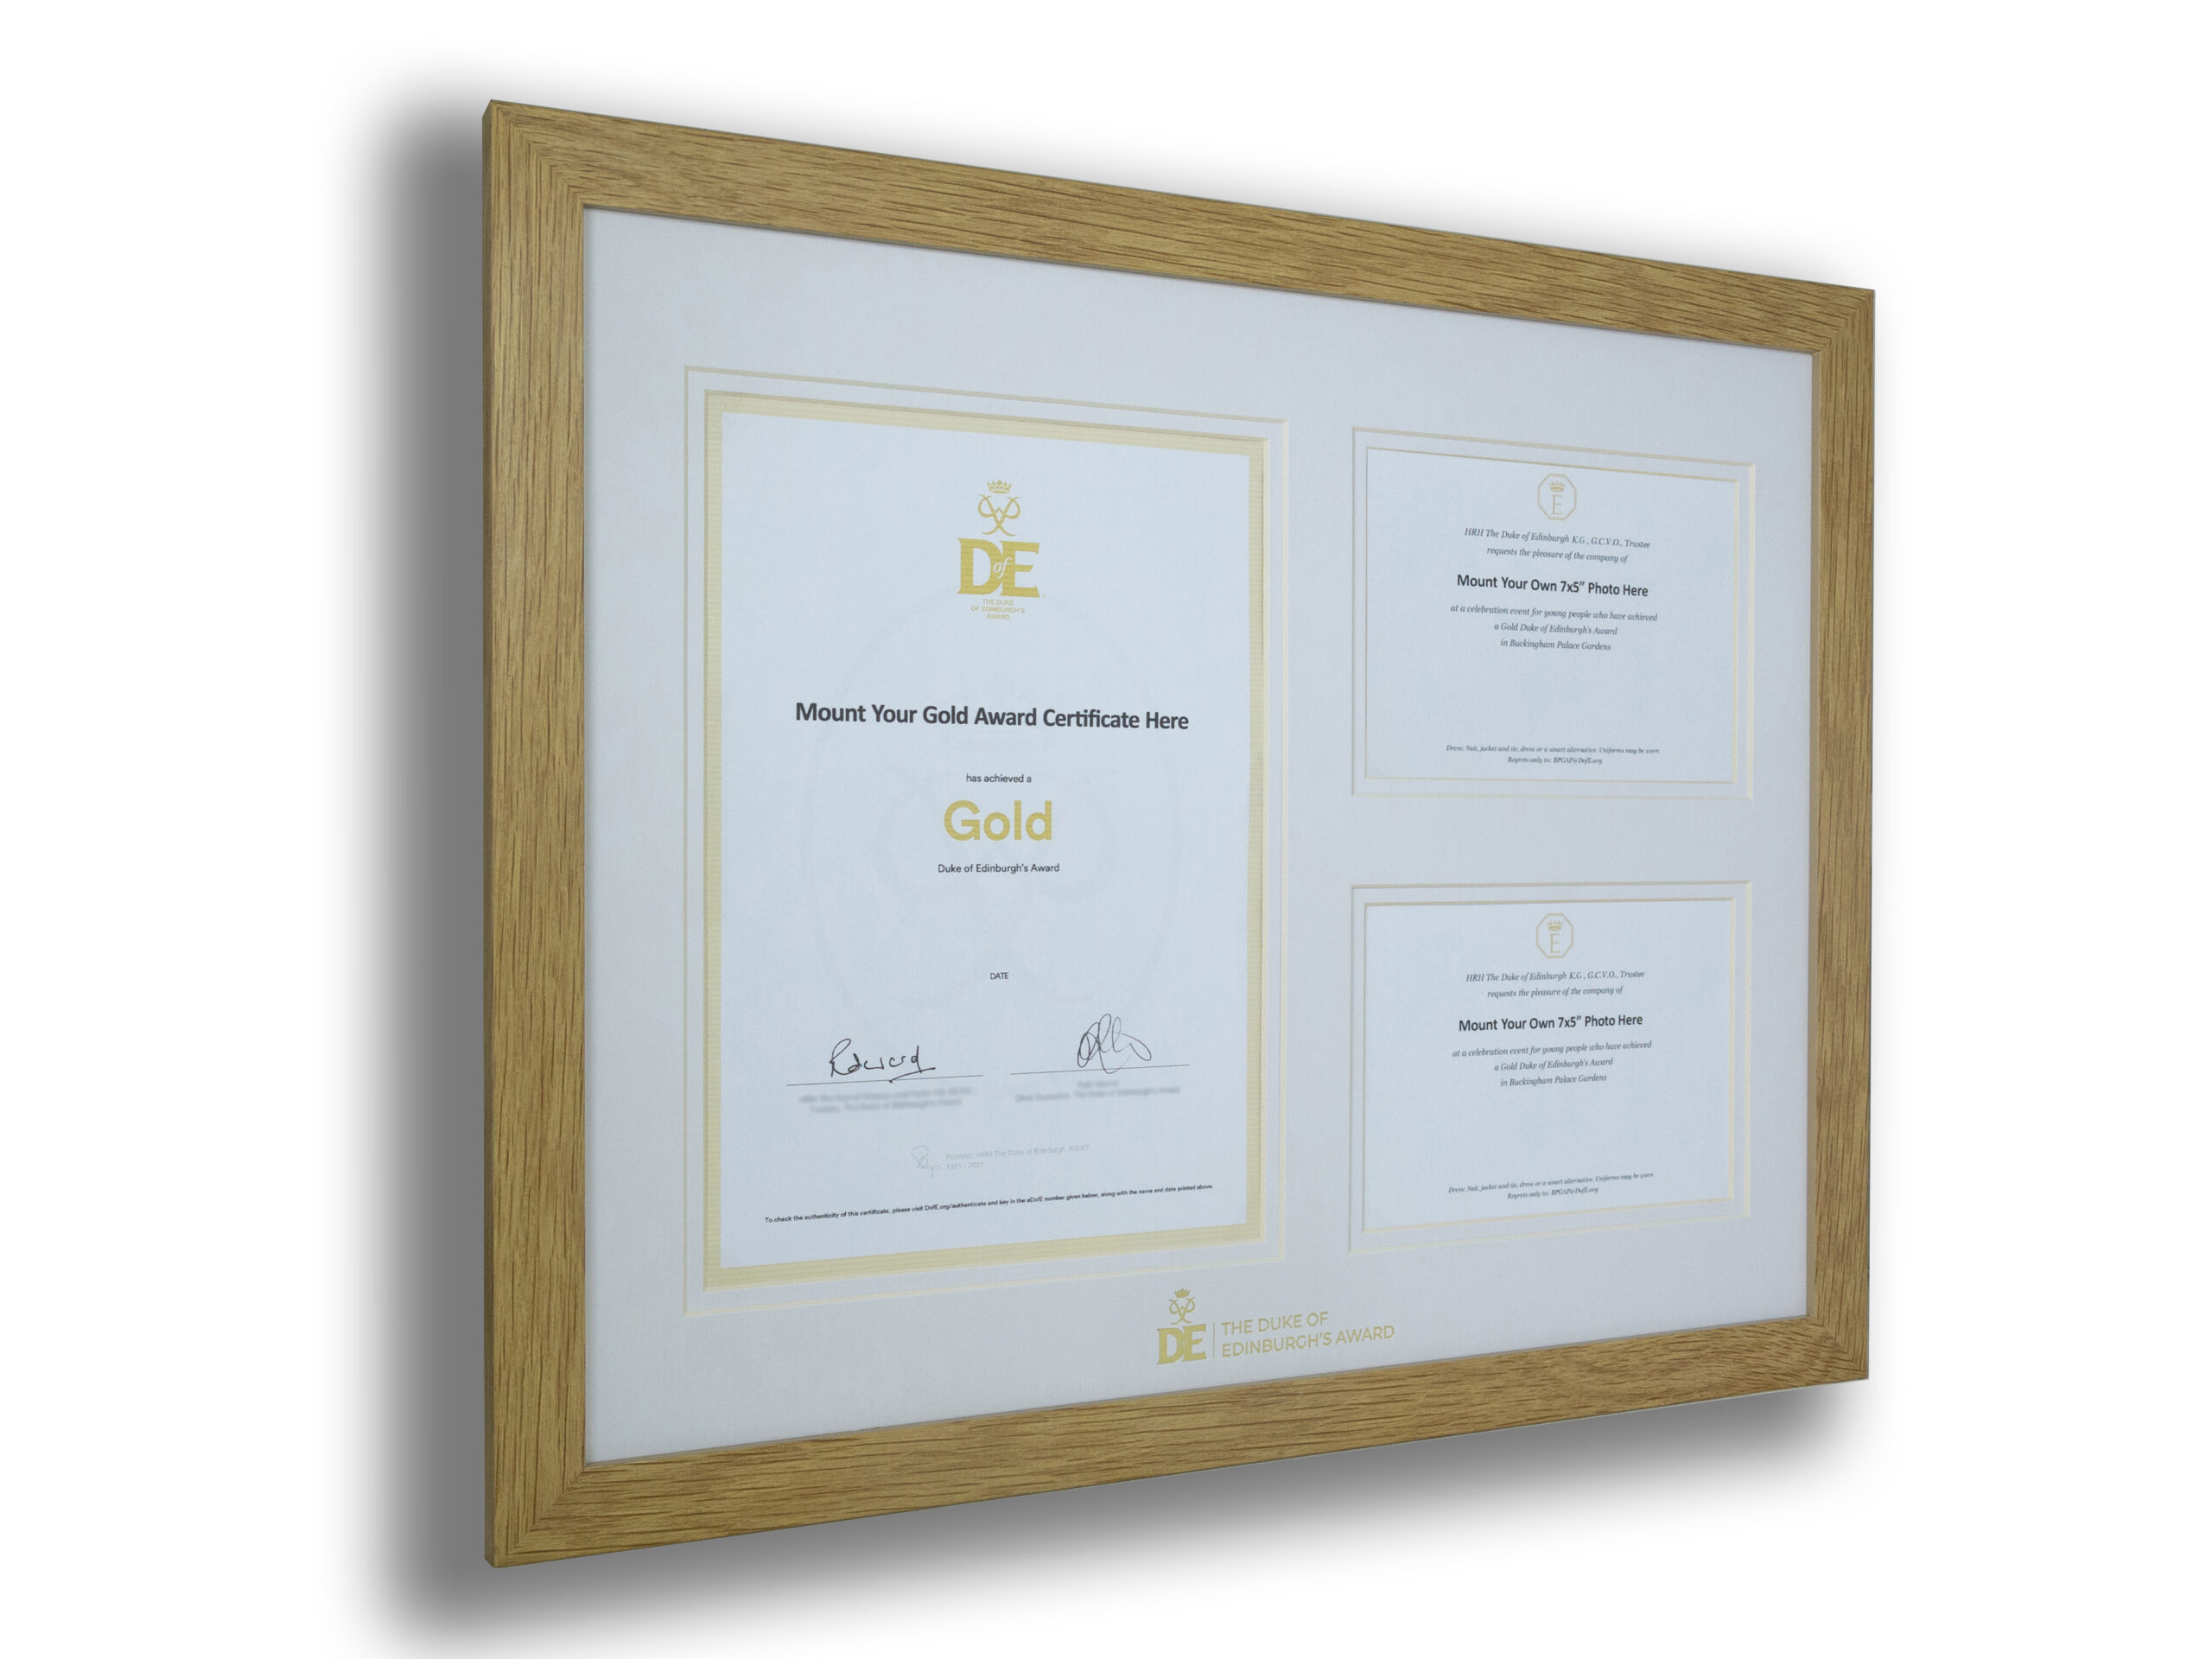 Tri-Aperture Mount – Spaces to mount your Gold Award Certificate, and two 7″x 5″ photographs (NI)